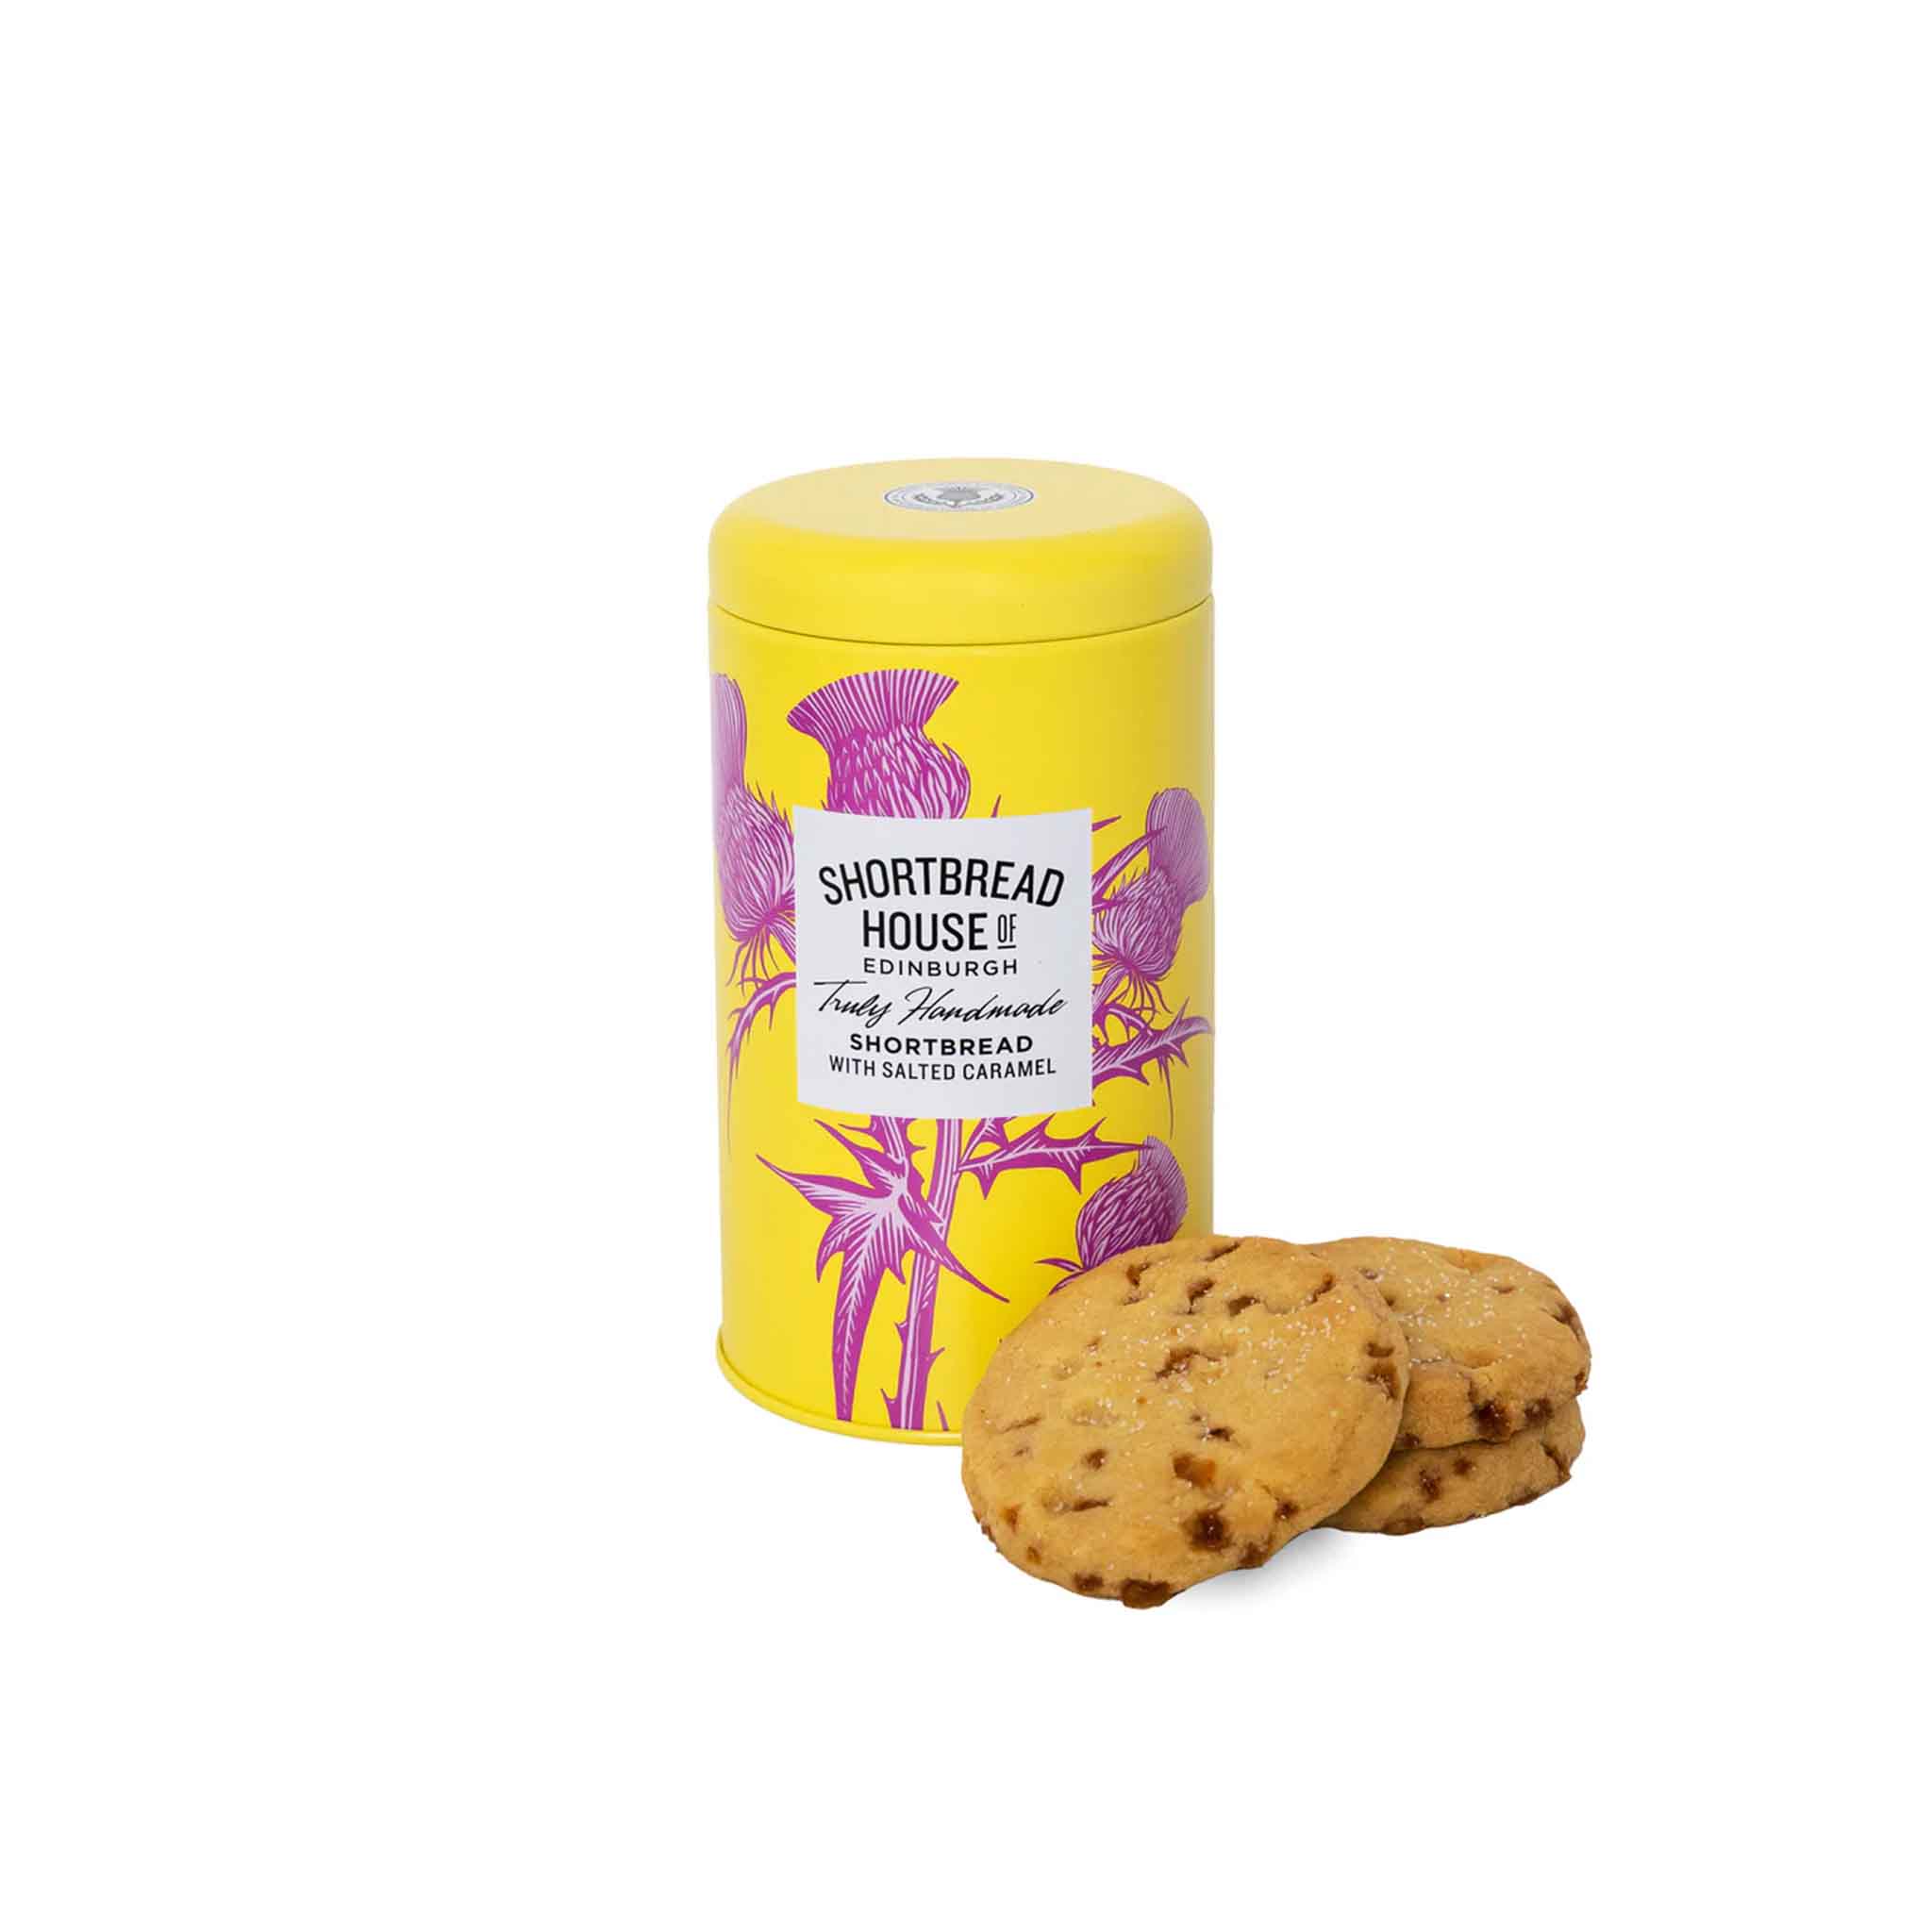 SHORTBREAD HOUSE SALTED CARAMEL COOKIES 140g